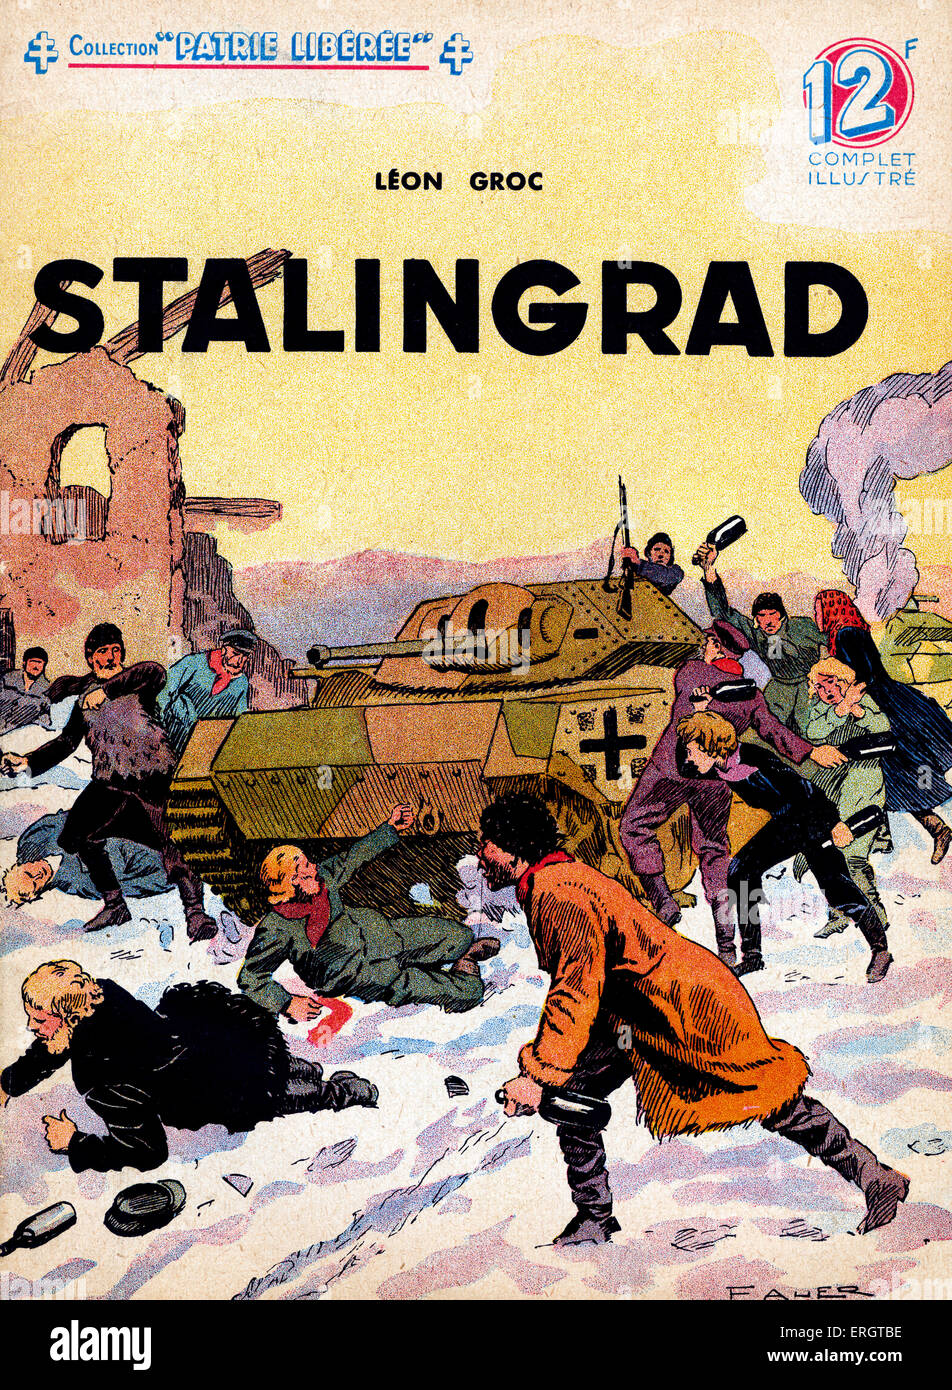 Battle of Stalingrad - illustration of the World War II battle in which the Germans besieged the Russian city (now Volgograd), Stock Photo